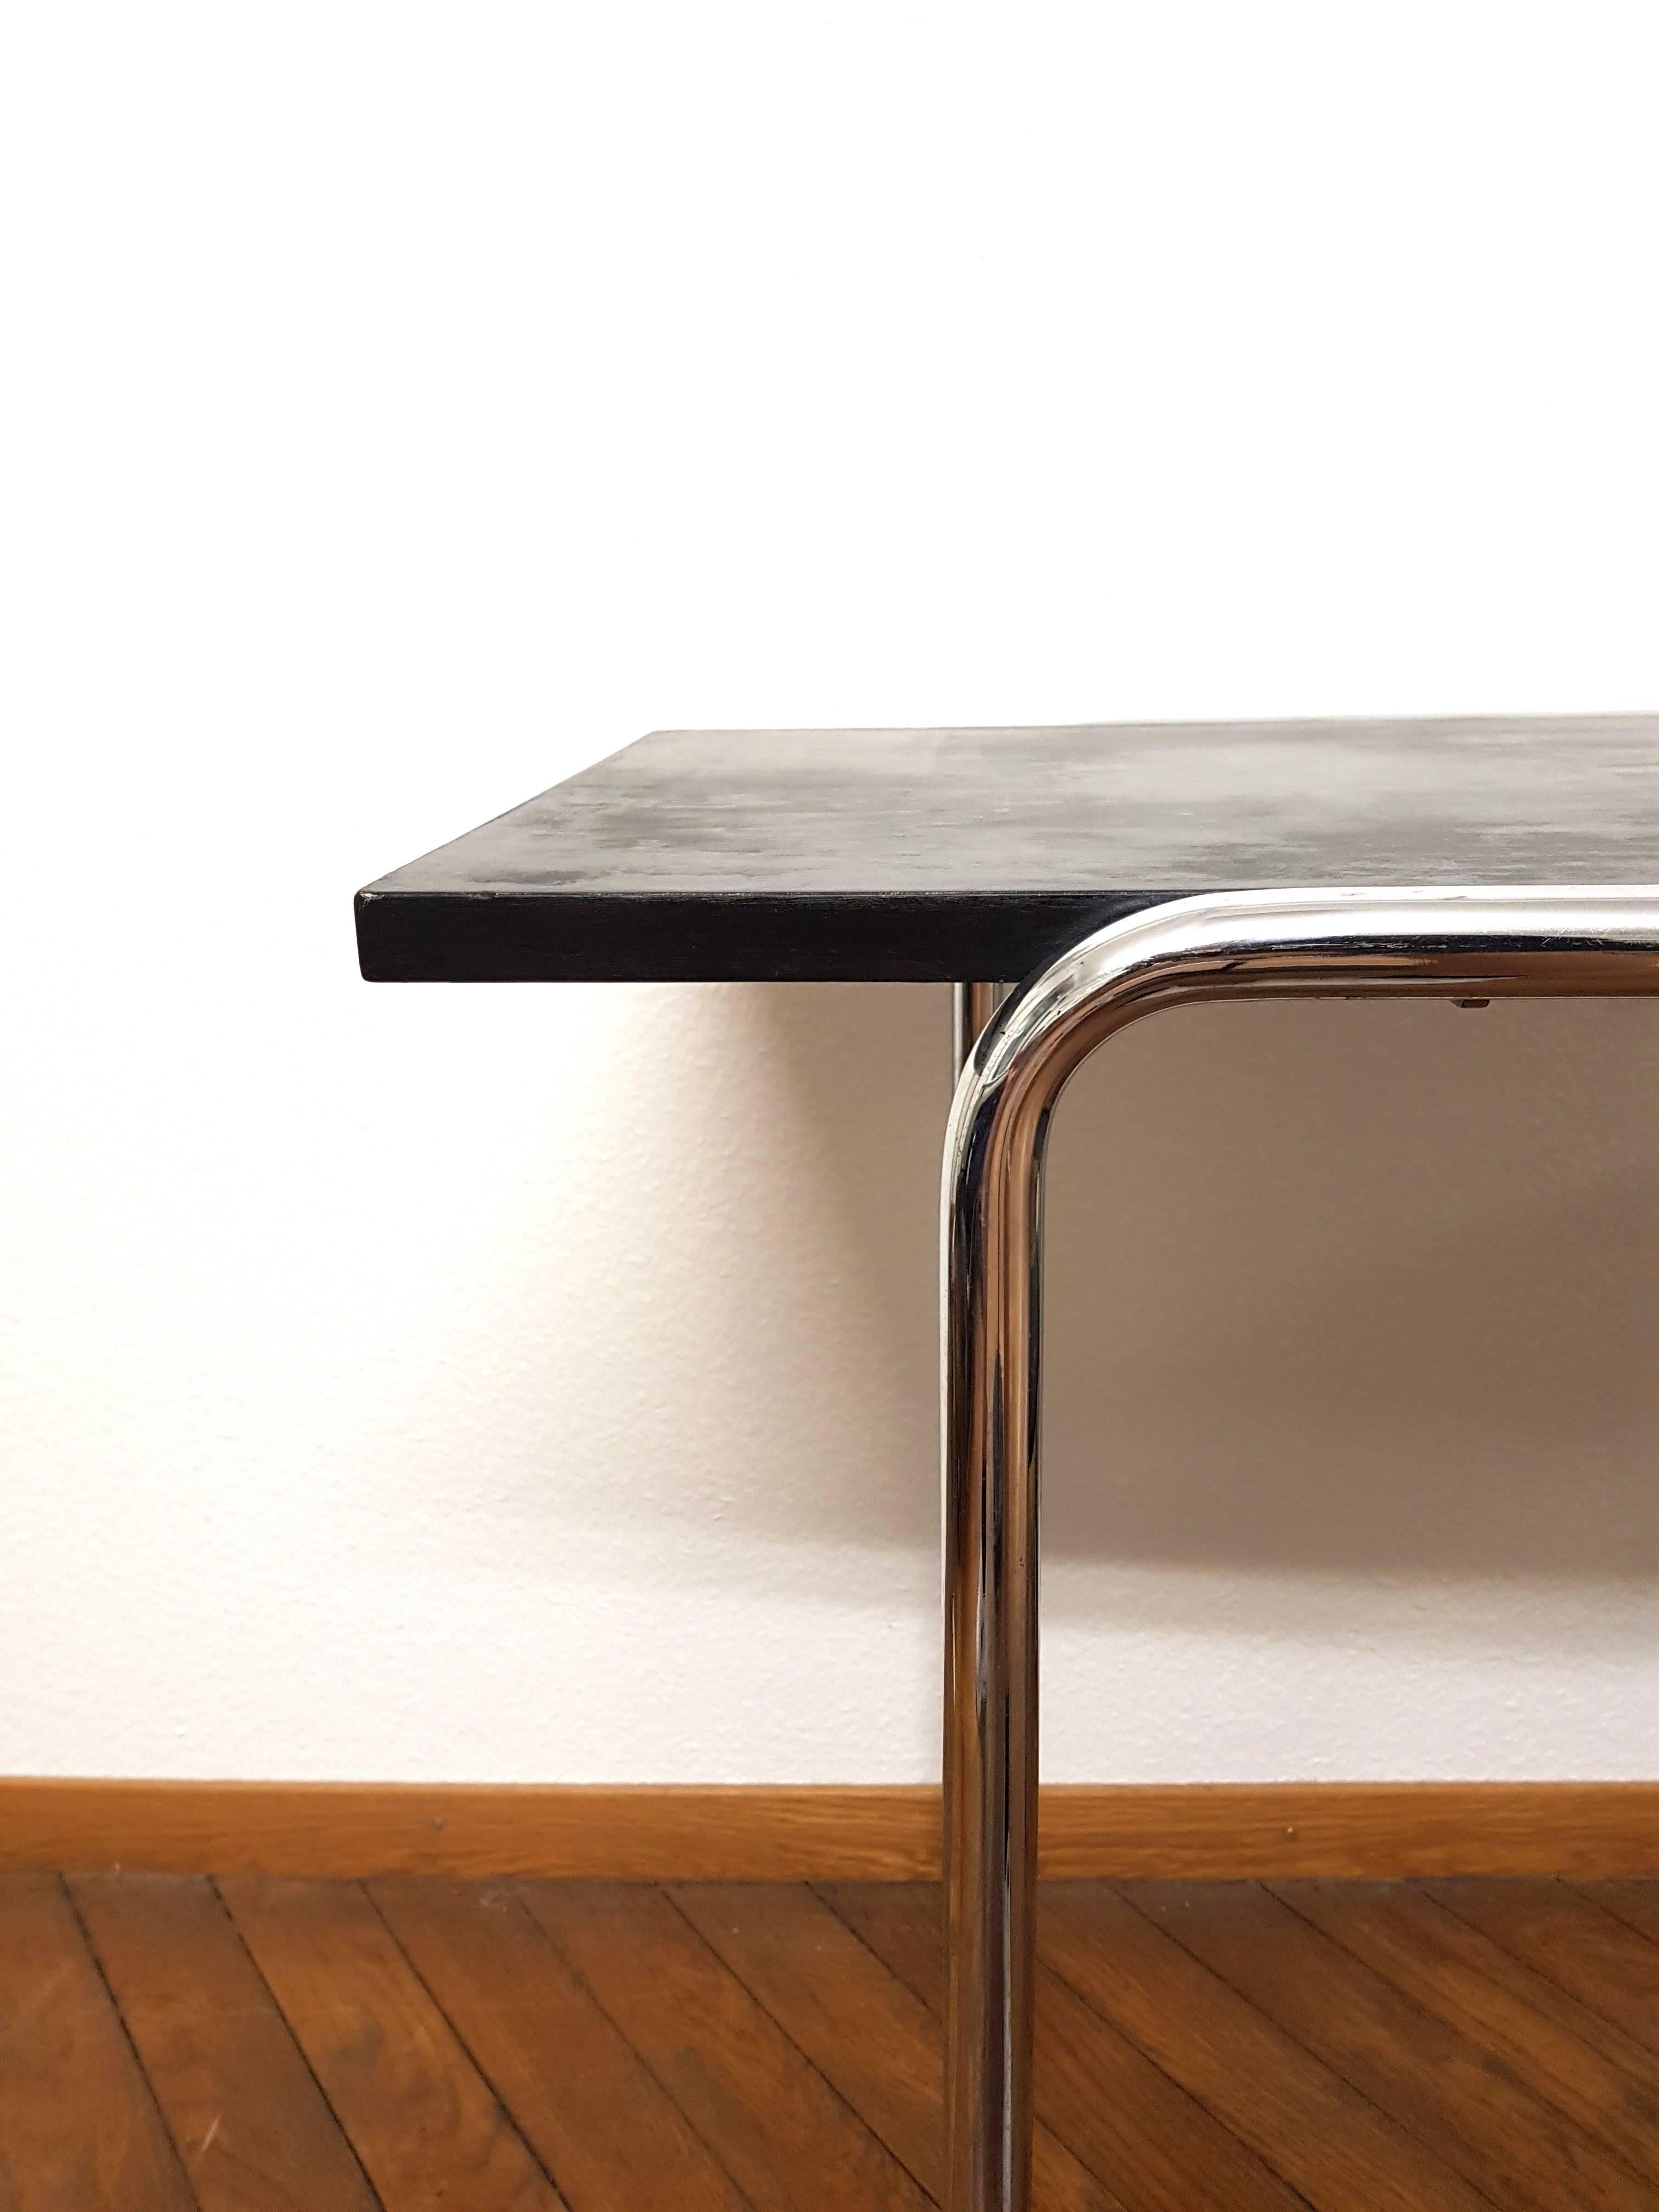 Your opportunity to get a desk, designed by Marcel Breuer. This wonderful object is in completely original condition.